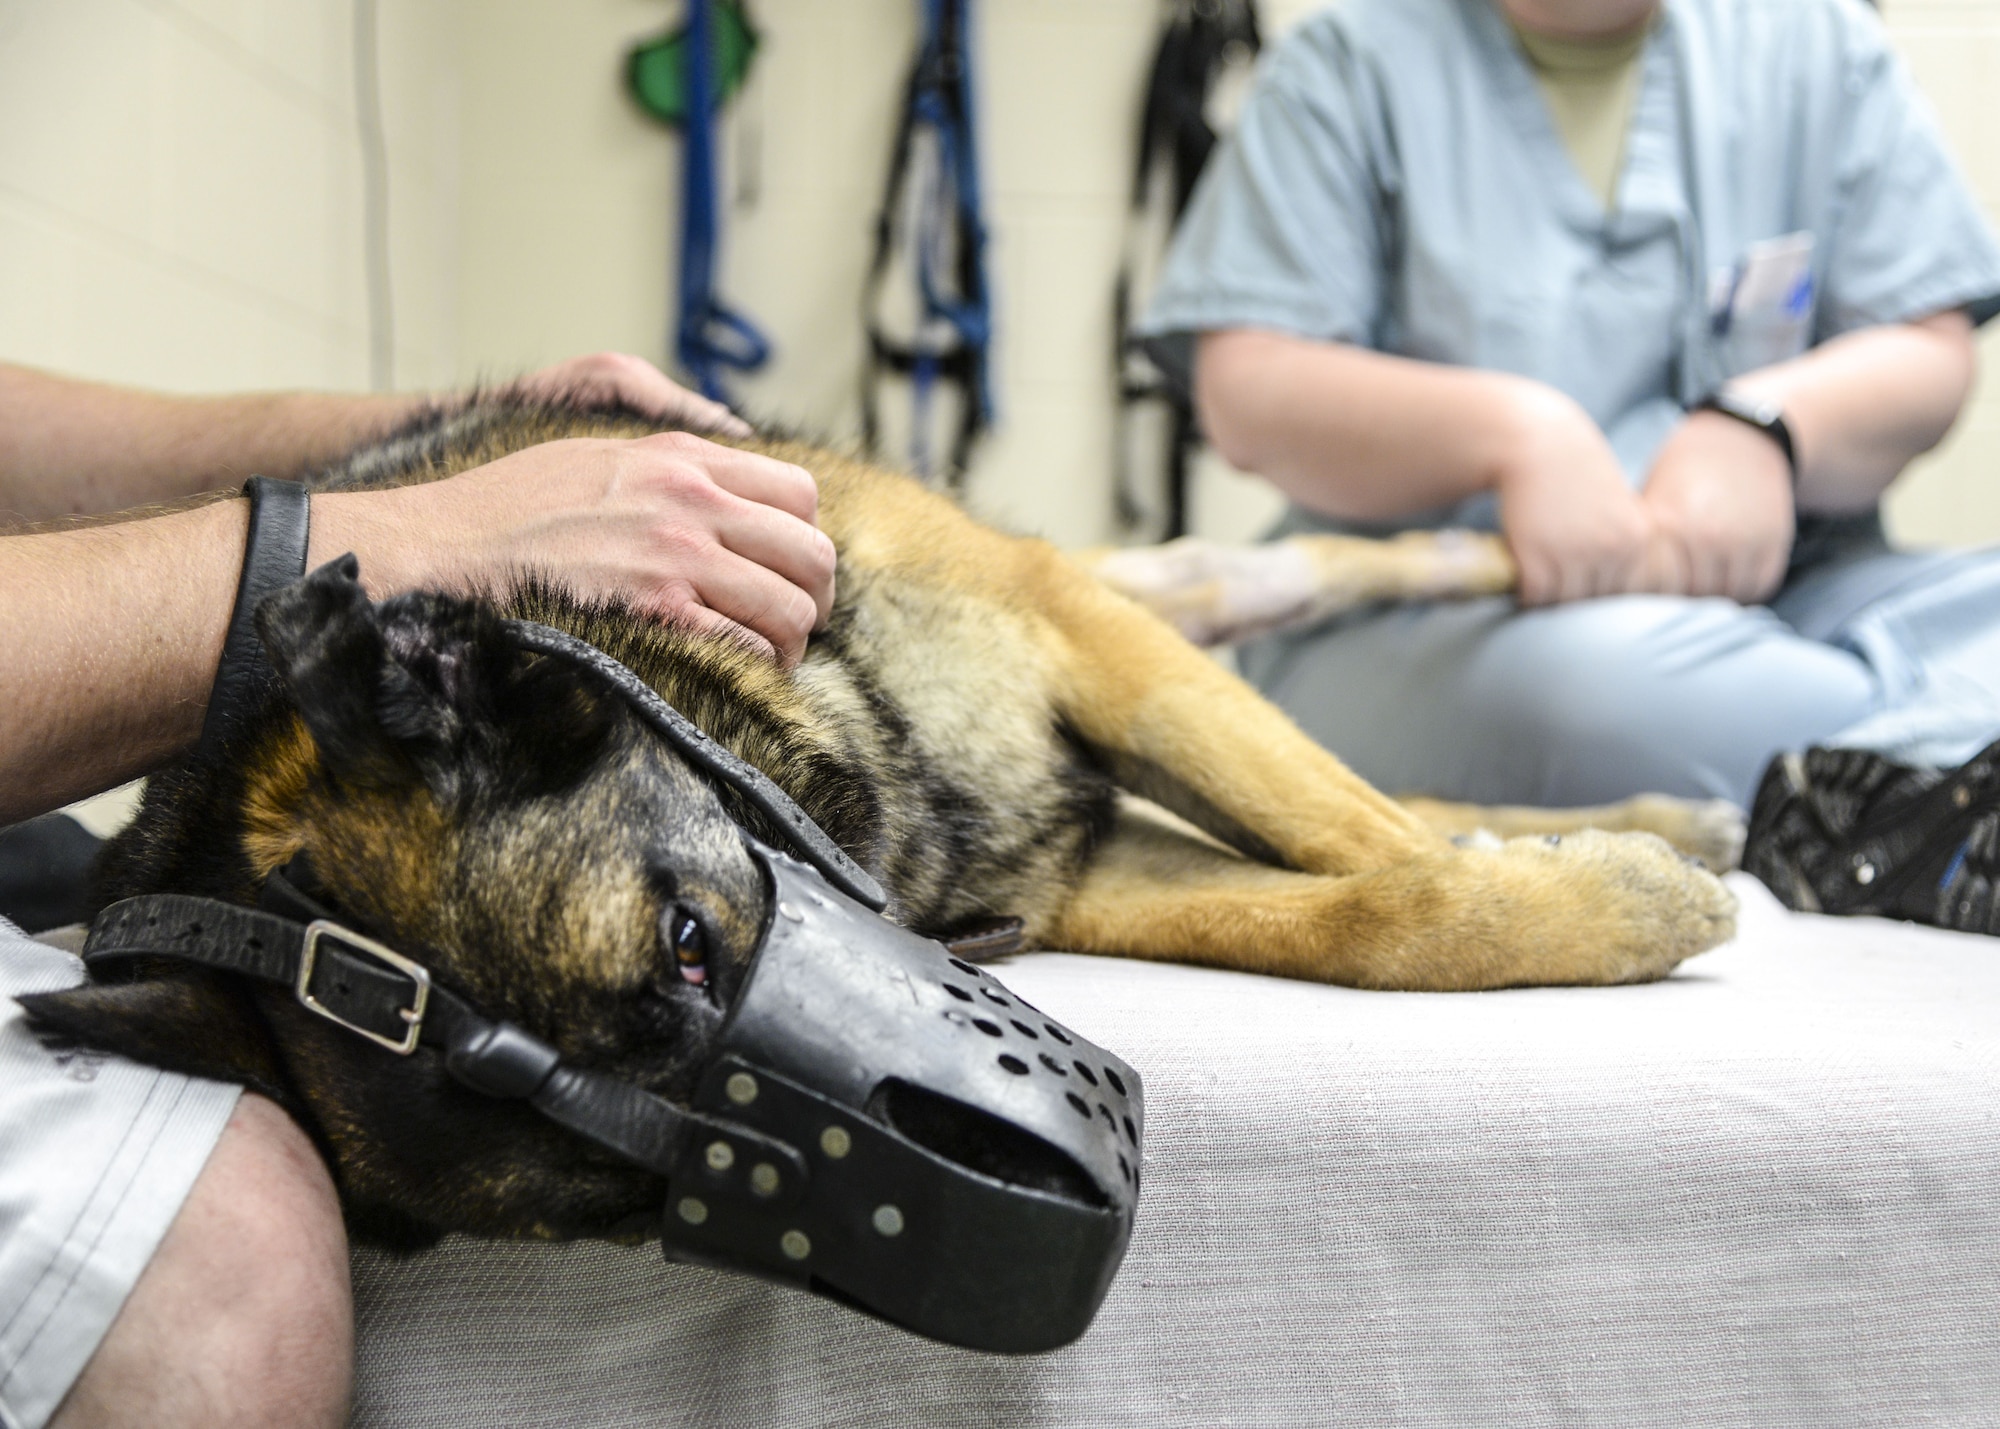 Military Working Dog SStash gets his injured leg examined prior to having his new outfitted leg brace put on at LTC Daniel E. Holland Memorial Military Working Dog Hospital at Joint Base San Antonio-Lackland, Texas, April 2, 2015. SStash became injured and inactivity led to severe muscle loss in his leg; the original leg brace could no longer fit properly.